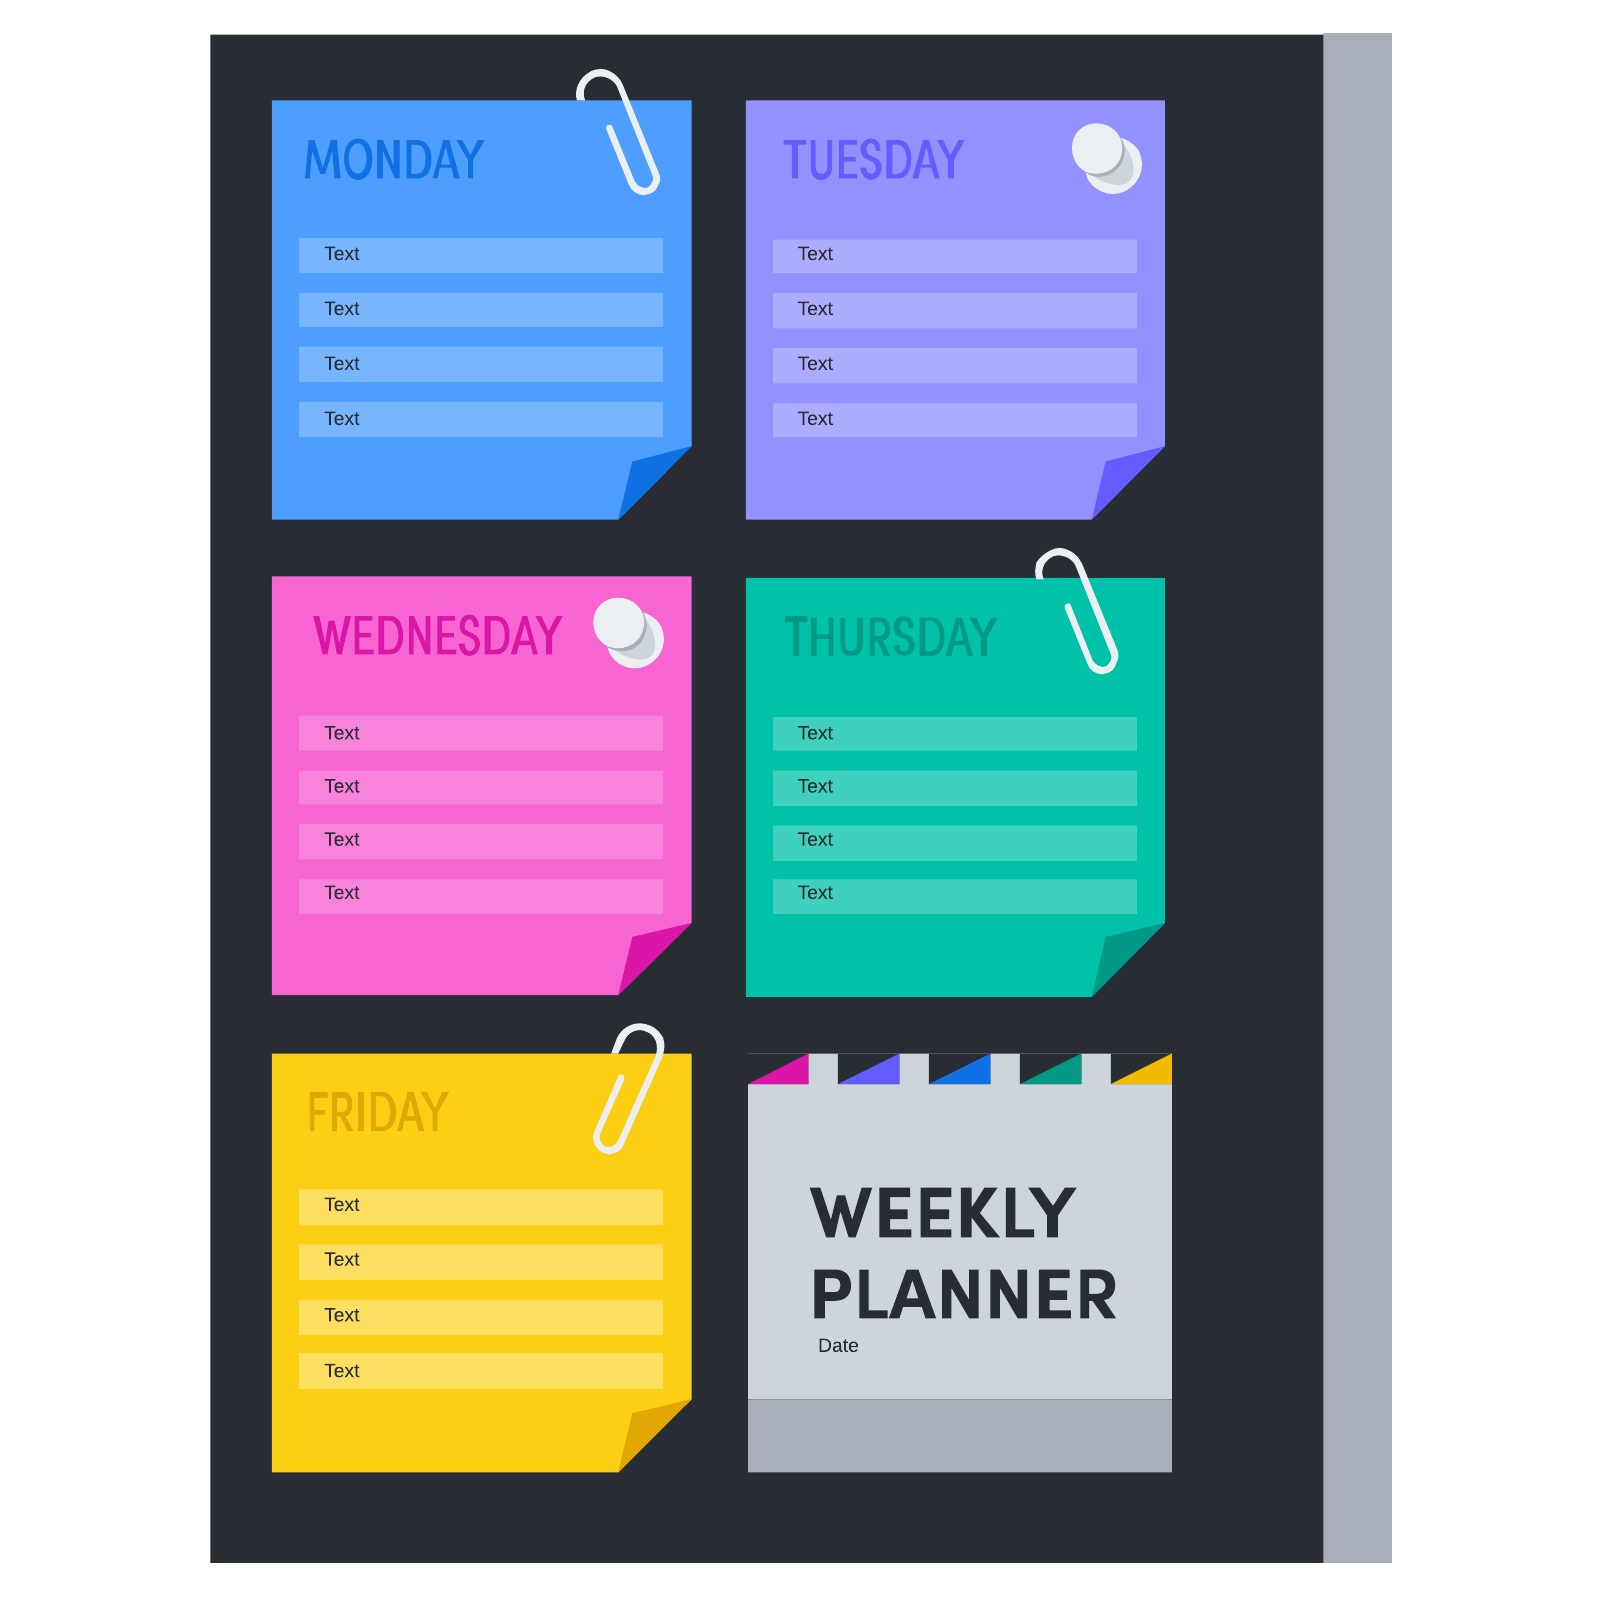 Sticky Note Daily Calendar example